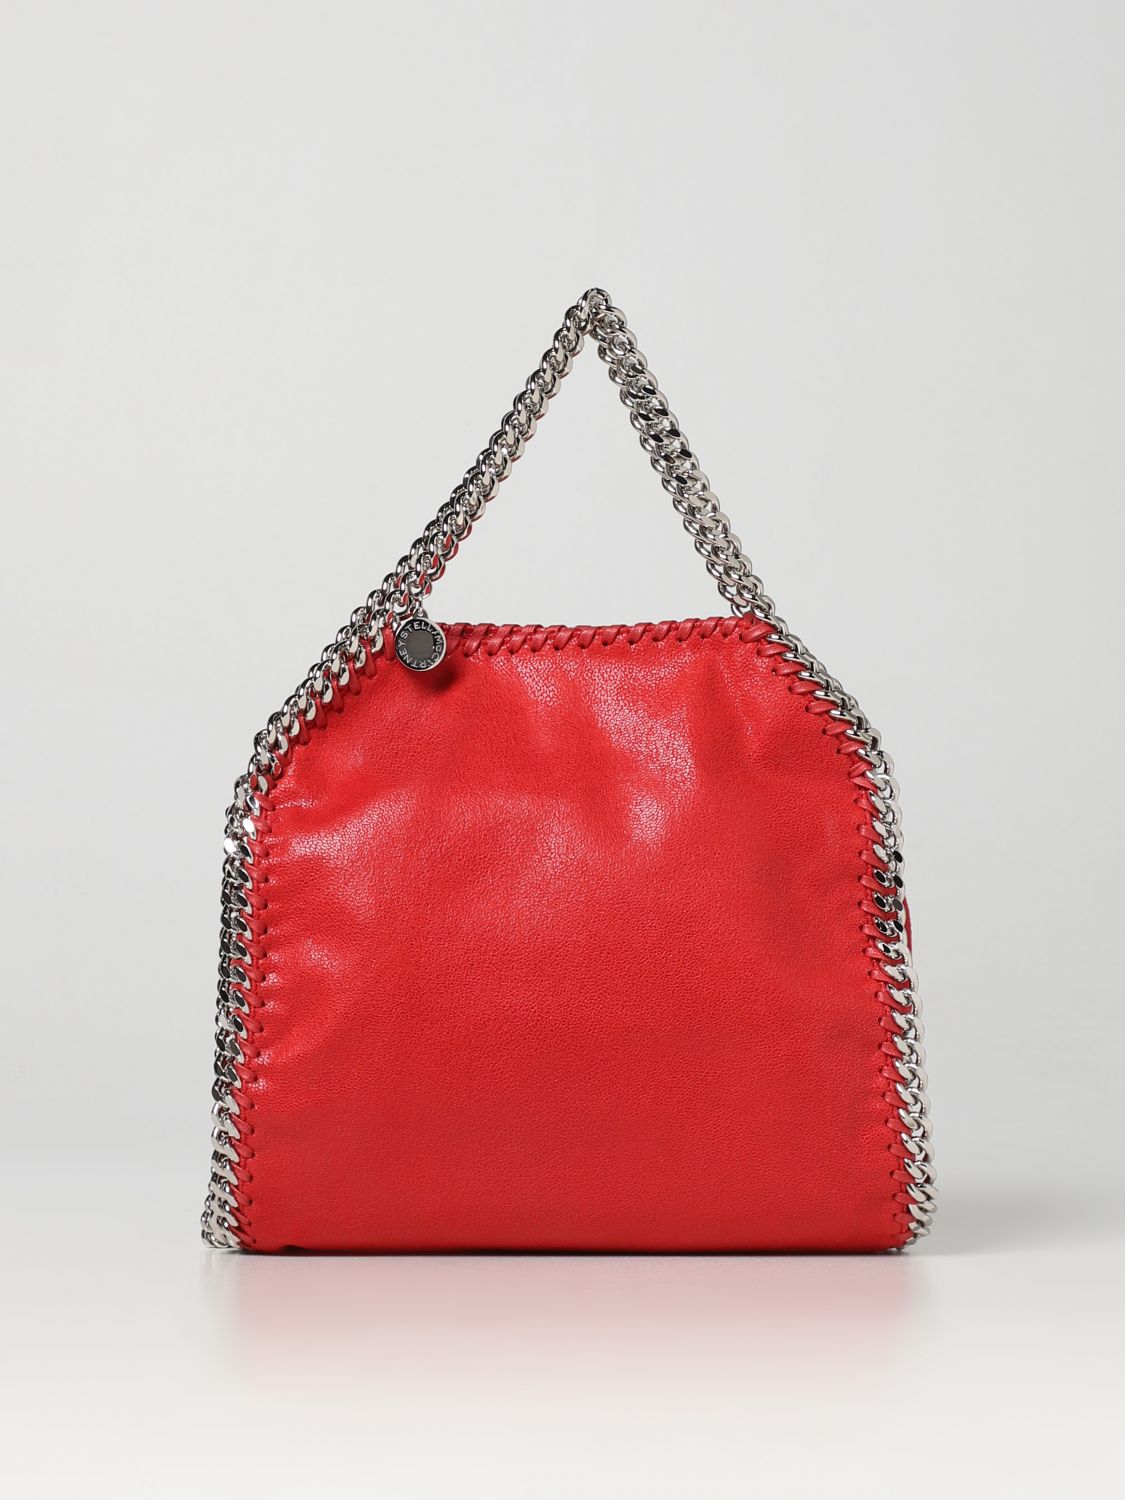 STELLA MCCARTNEY STELLA MCCARTNEY FALABELLA TOTE BAG IN SYNTHETIC LEATHER,D75899014